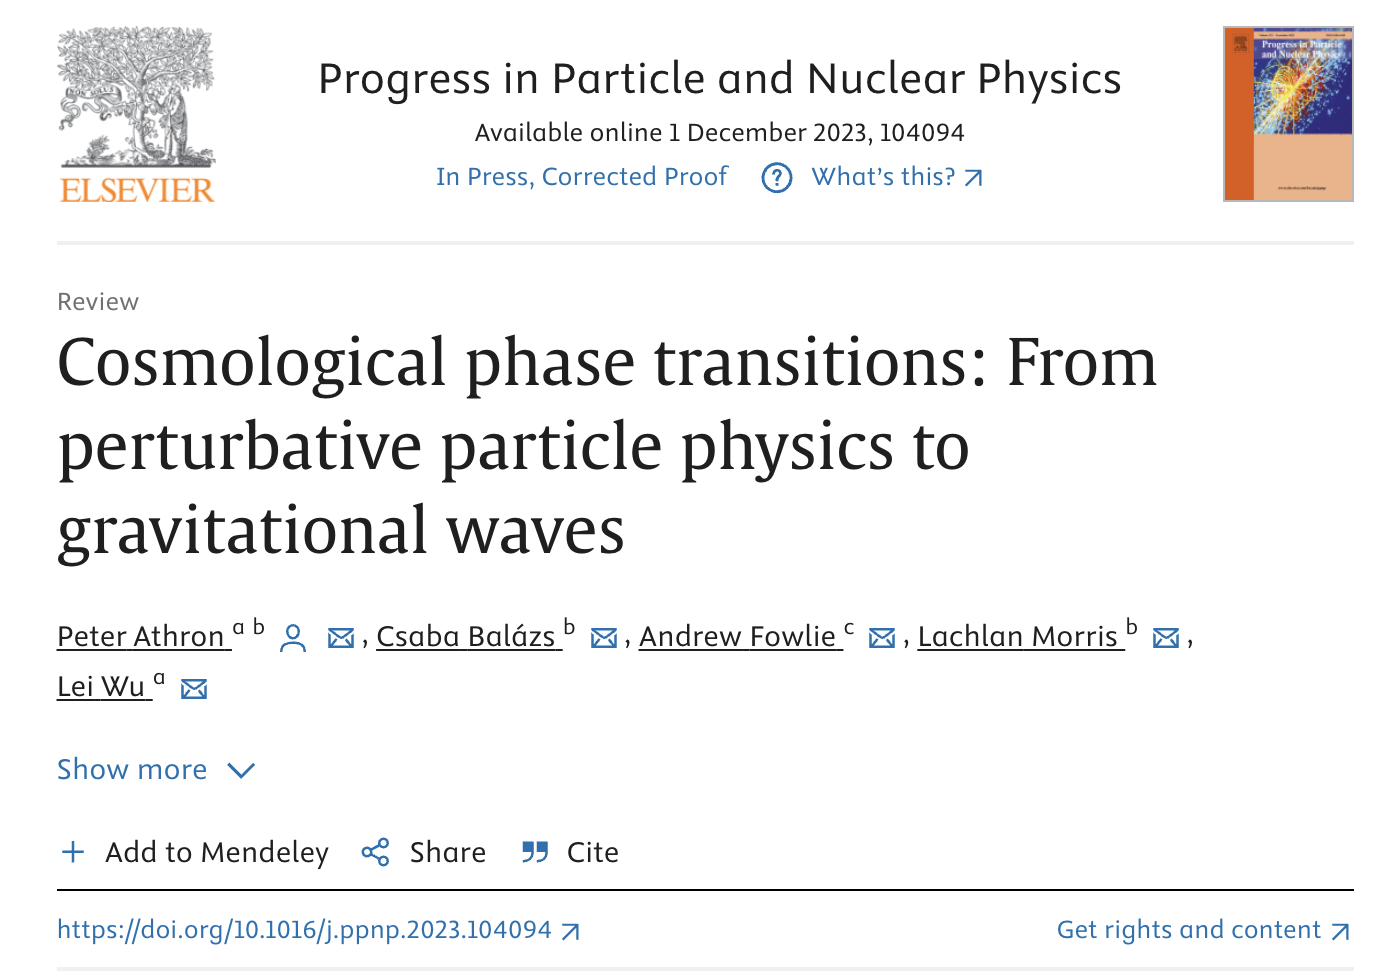 Dr Andrew Fowlie published a high-level review of first-order cosmological phase transitions and gravitational waves